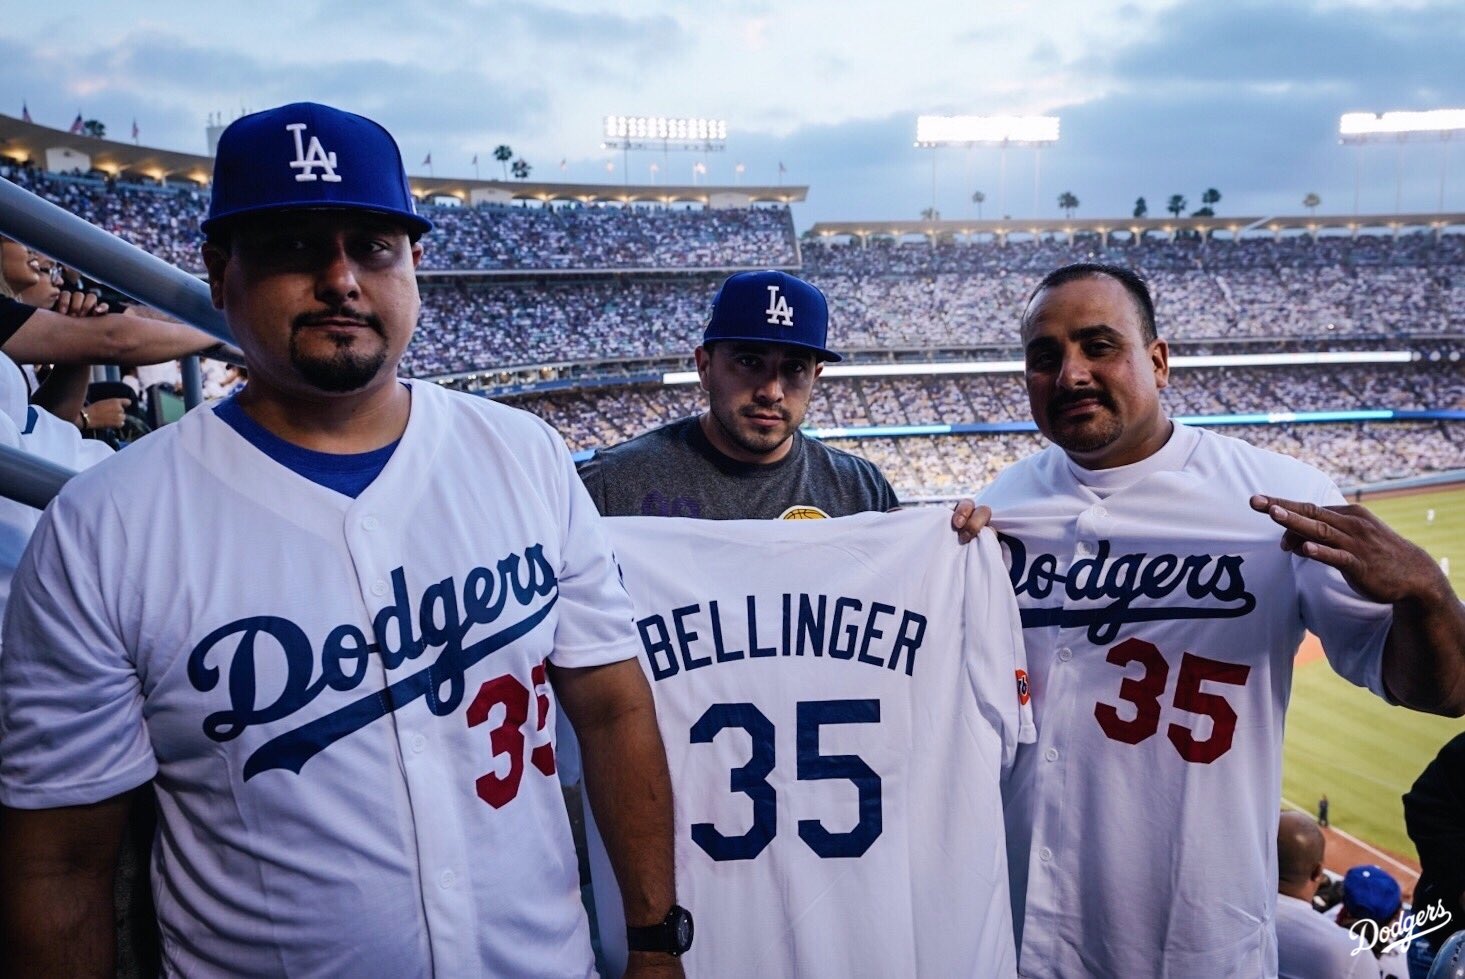 dodgers player jersey giveaway